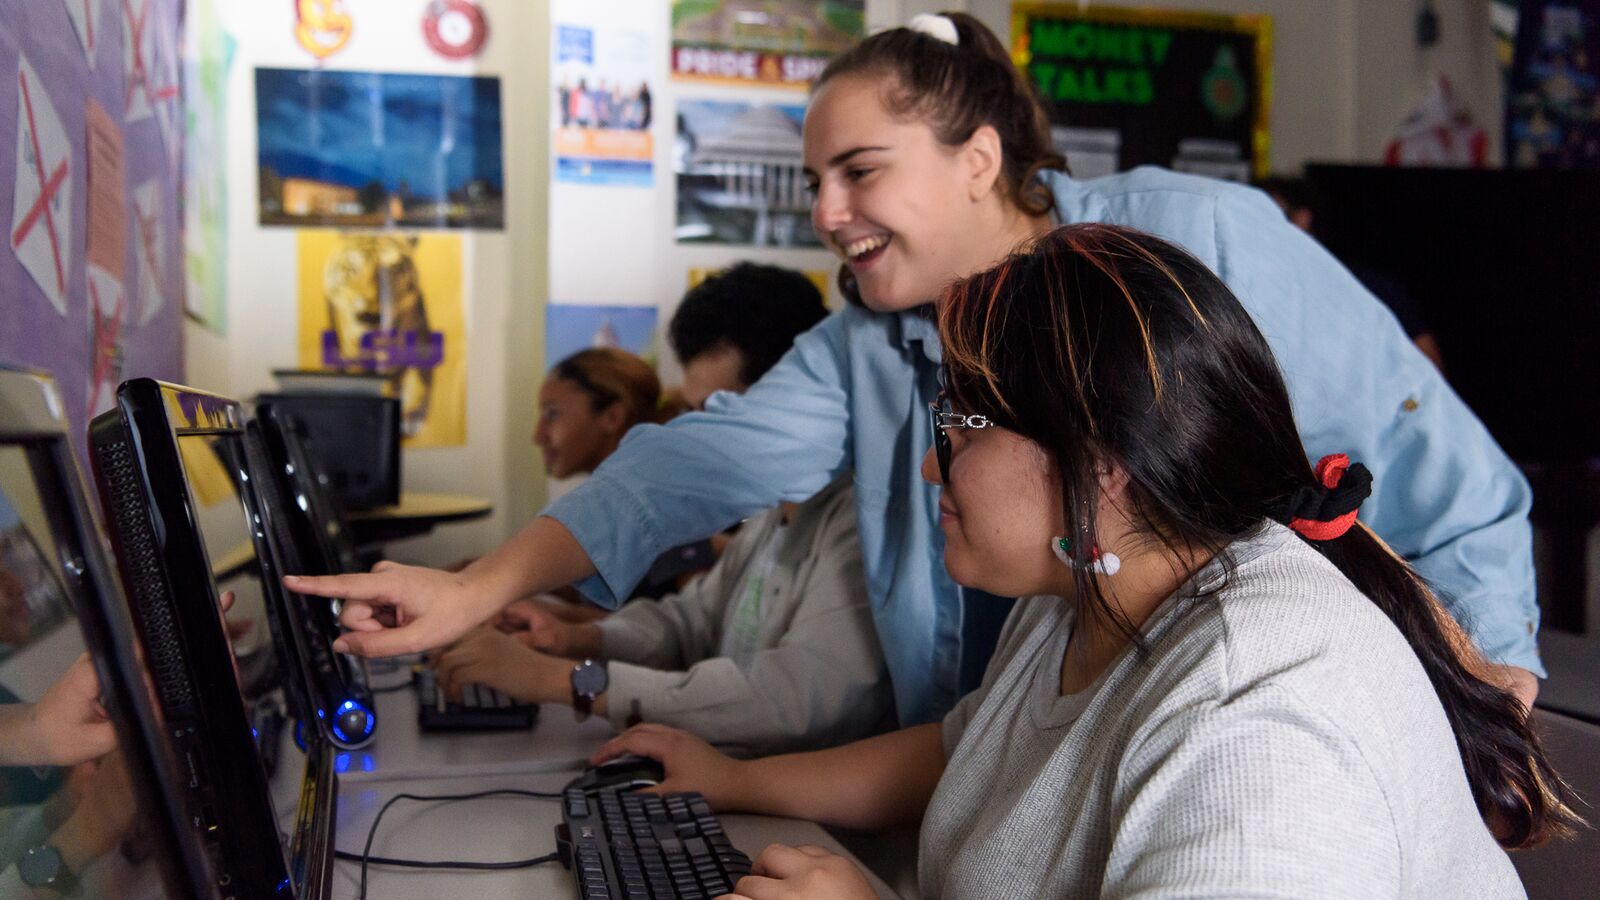 A student works on the computer as a mentor points something out on the screen